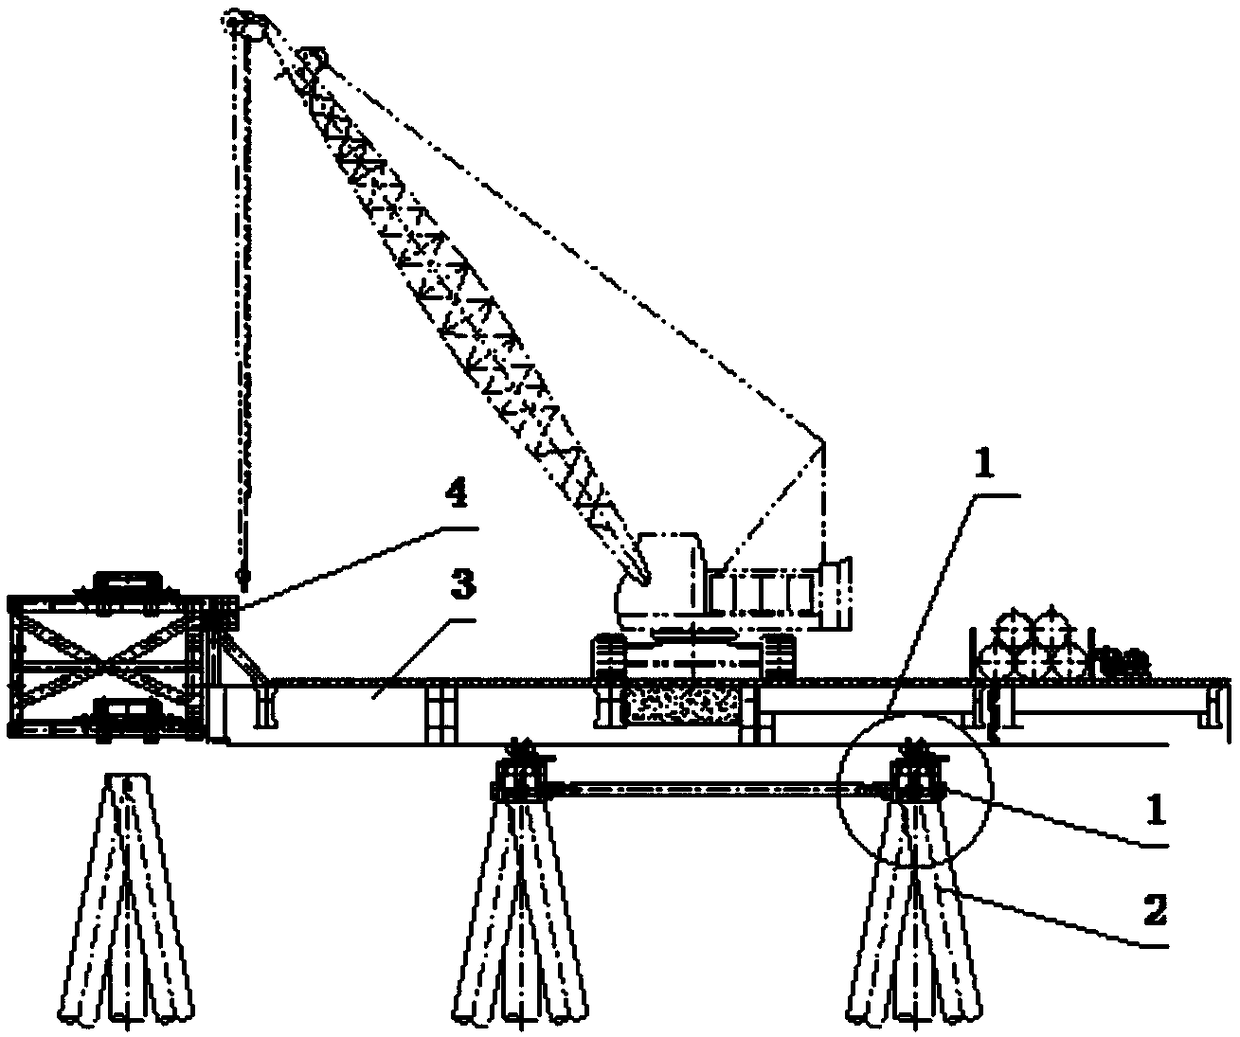 Wharf integrated construction system and method based on pile top pushing platform